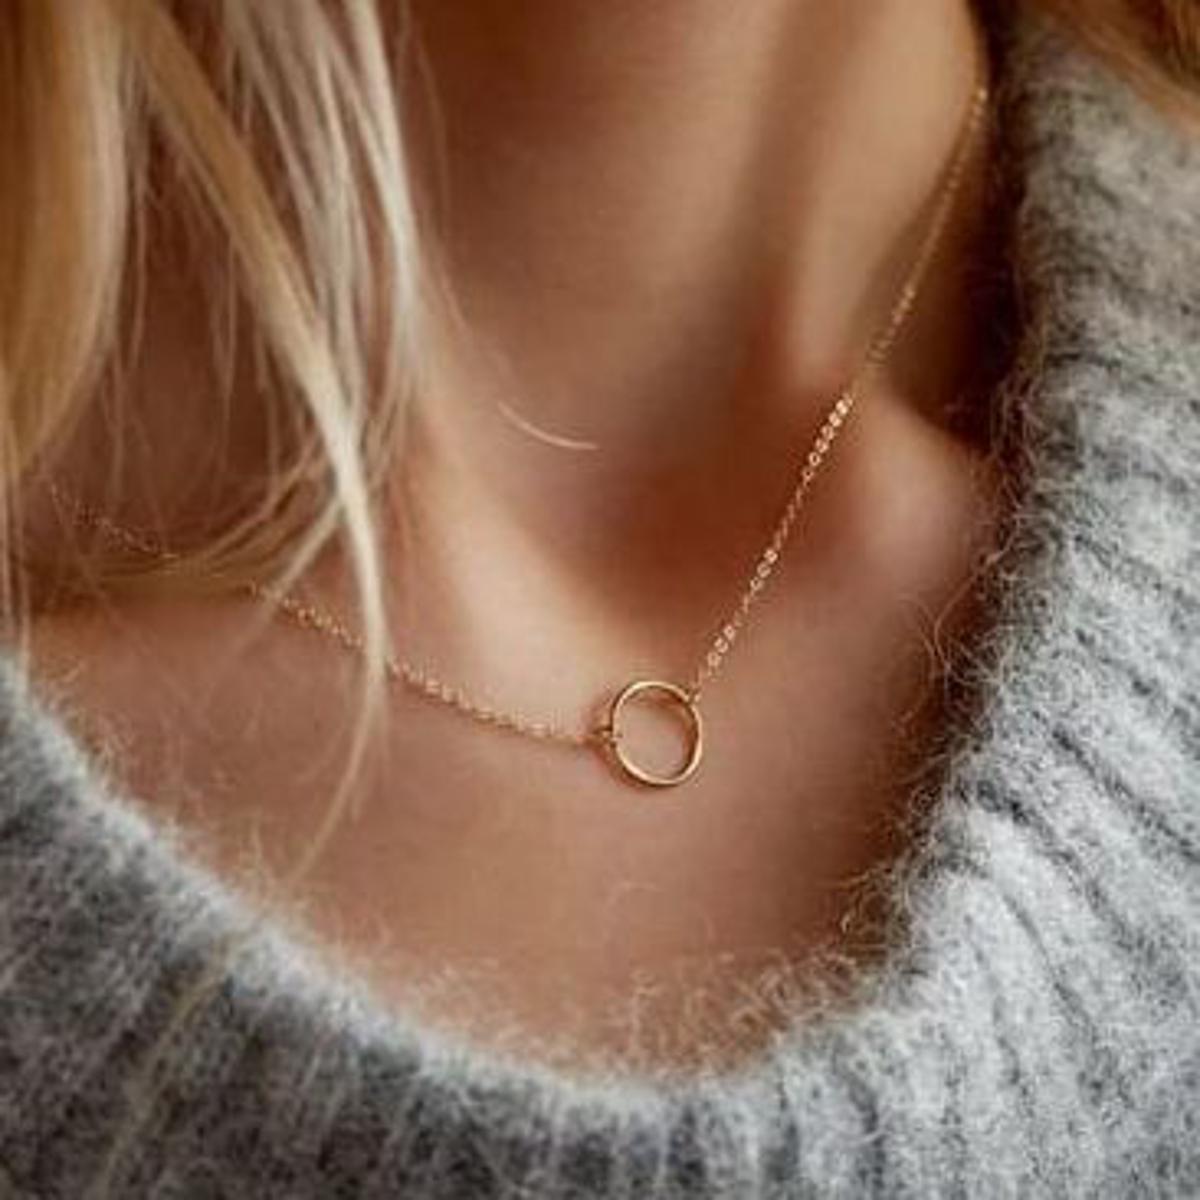 New Trendy Alloy Cute Elegant Simple Karma Wish Shine Free Luck Pendant  Necklaces for Women Fashion Accessories Jewelry Dropship